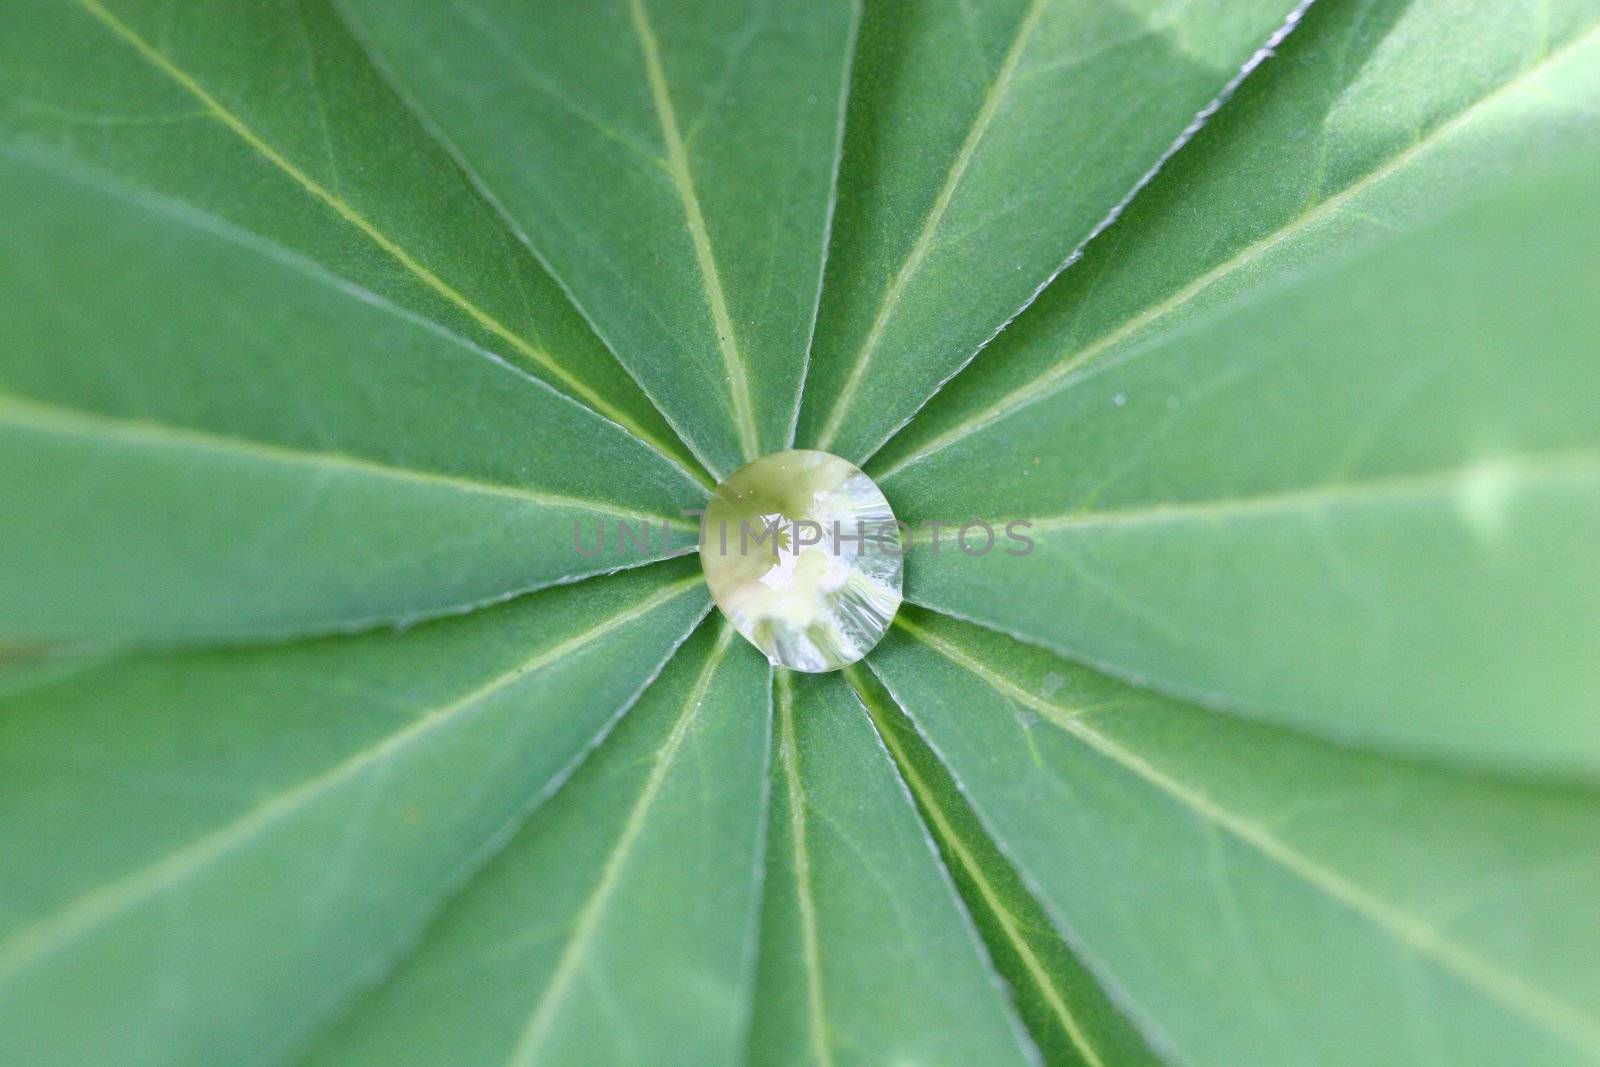 a single clear drop of water in the center of a palm leaf